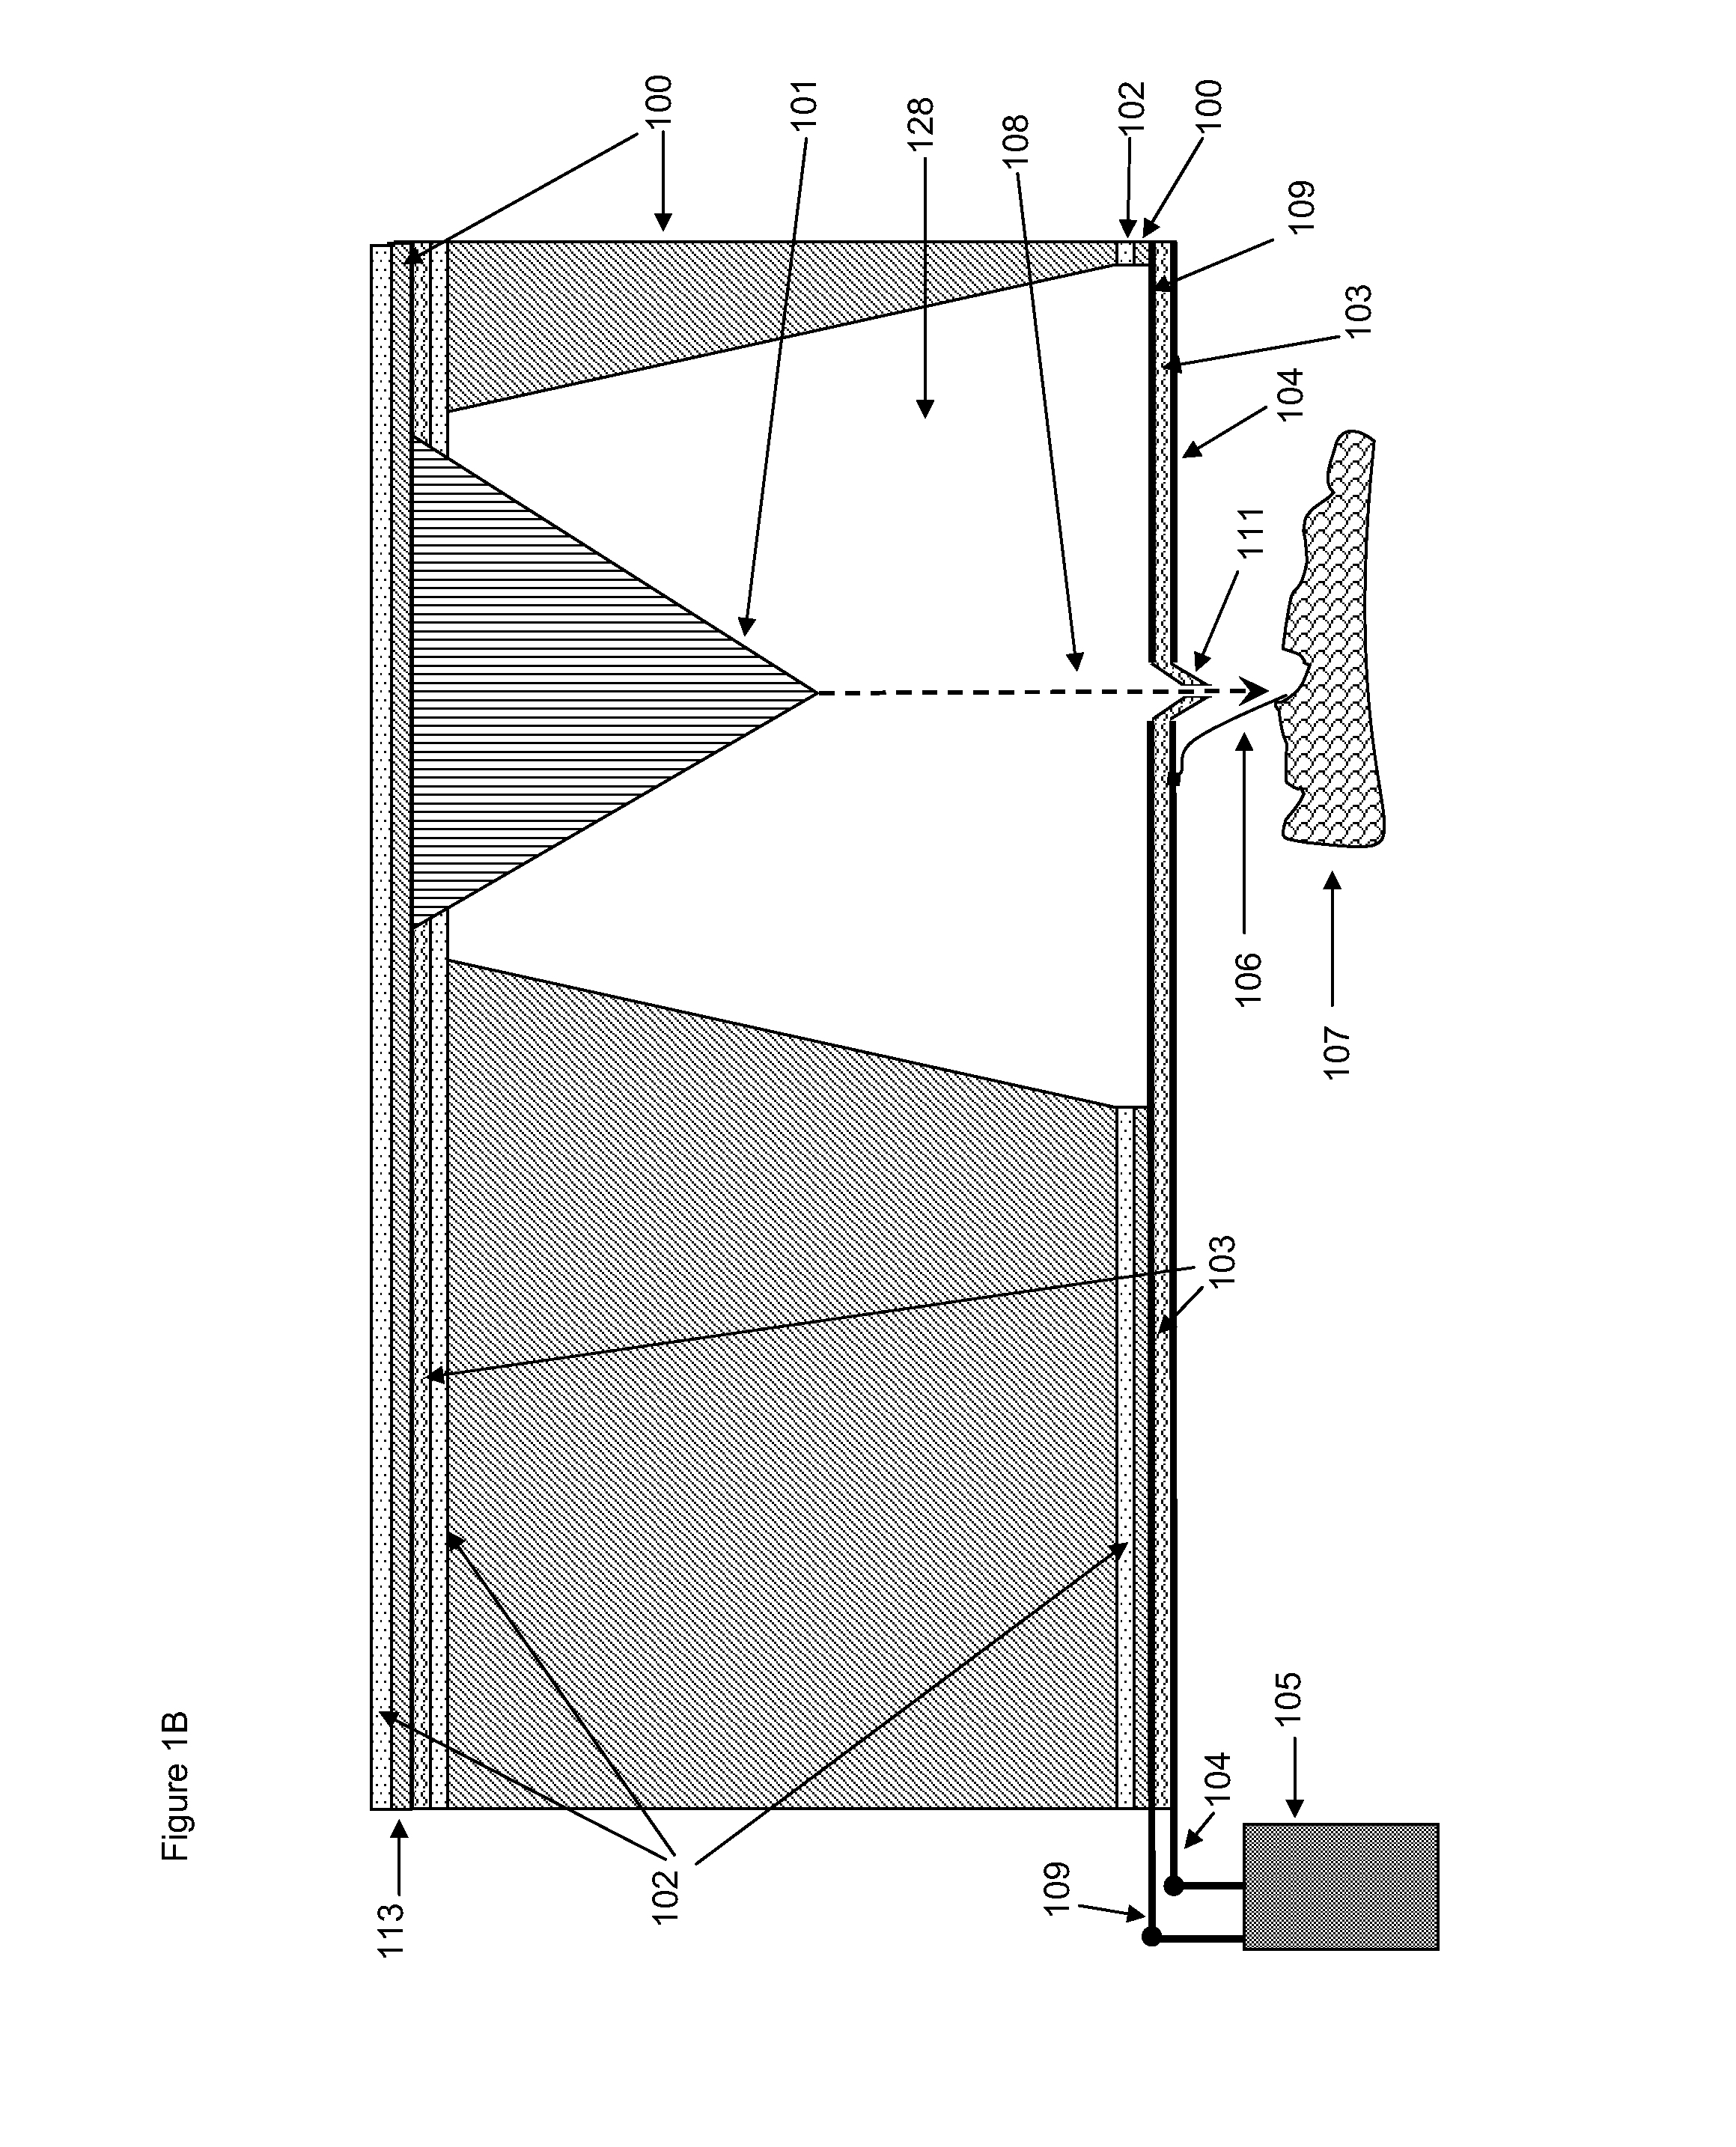 Micromachined electron or ion-beam source and secondary pickup for scanning probe microscopy or object modification